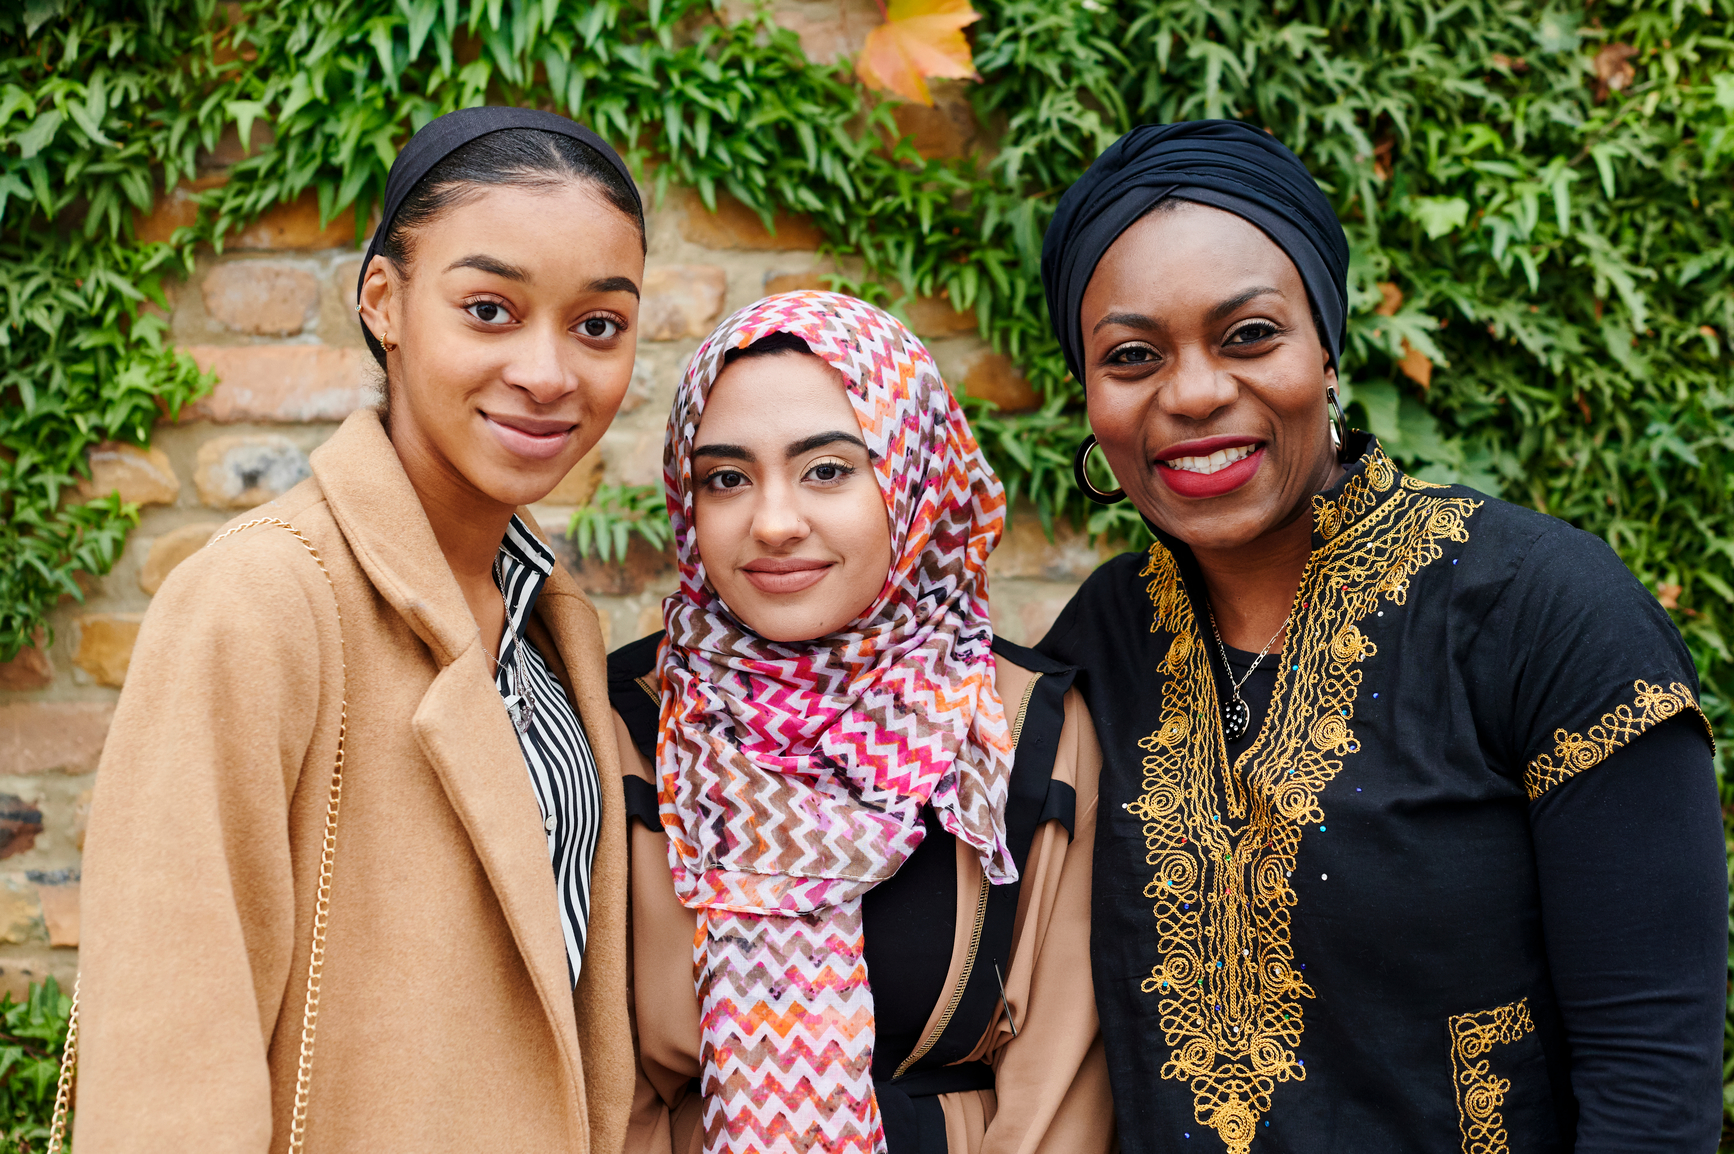 Diverse group of smiling Muslim women standing together outside in front of a brick wall in a park